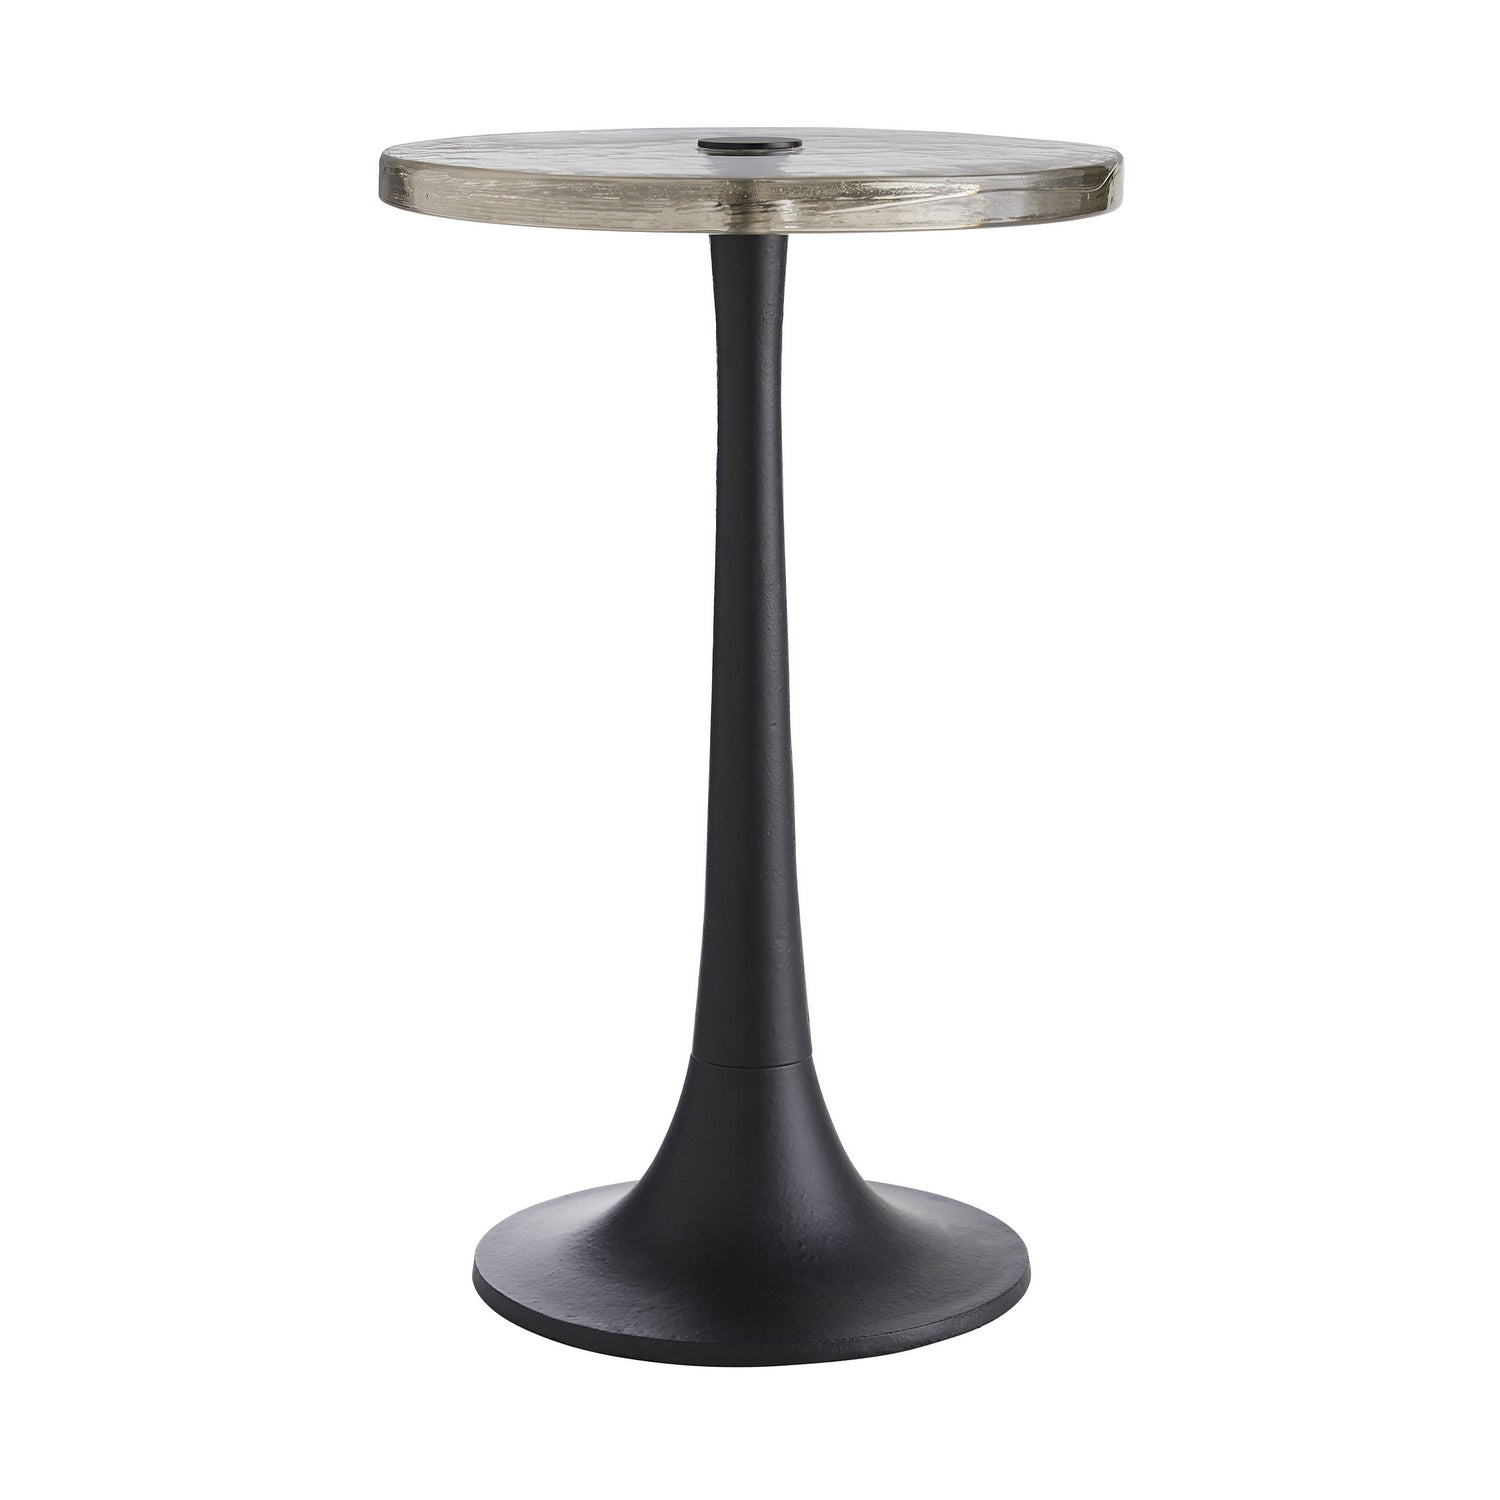 Table from the Eric collection in Natural Iron finish